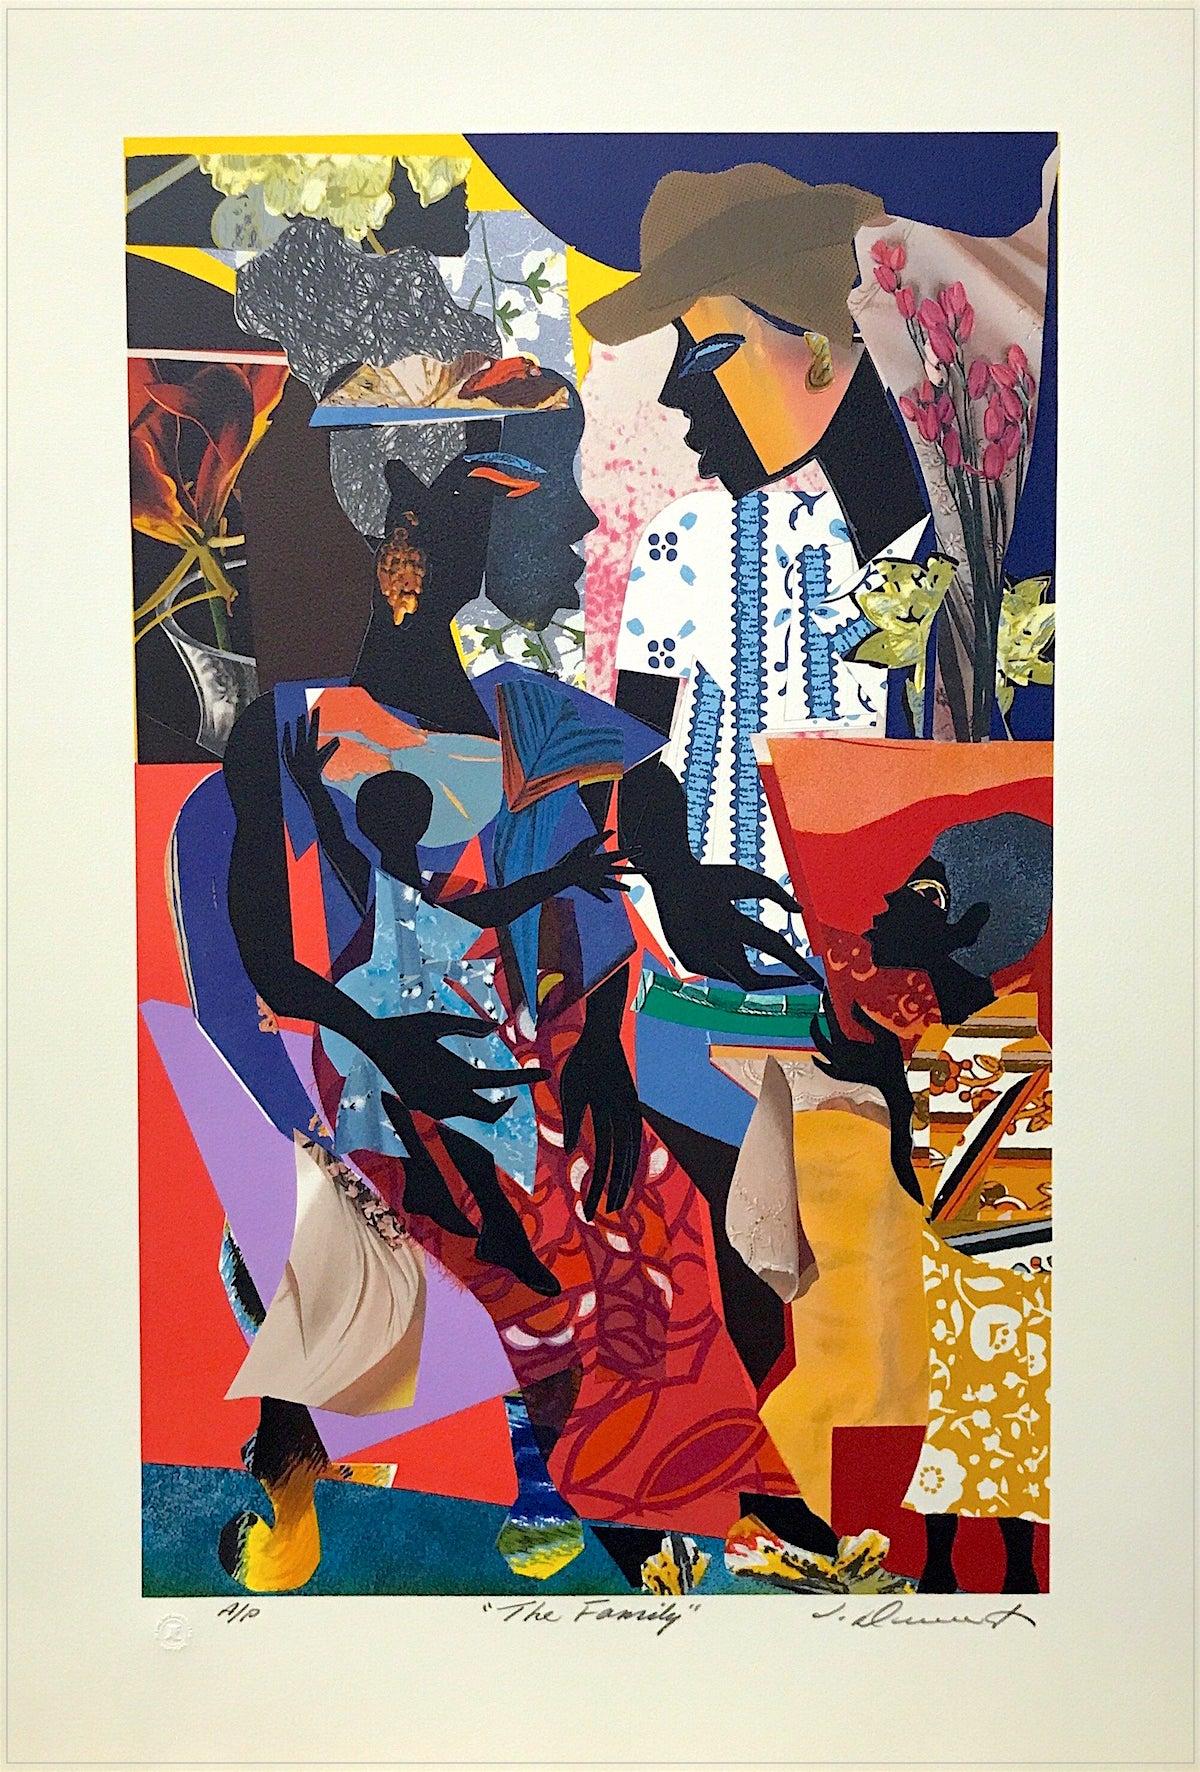 James Denmark Figurative Print - THE FAMILY Signed Lithograph, Black Family Portrait, Collage, African American 